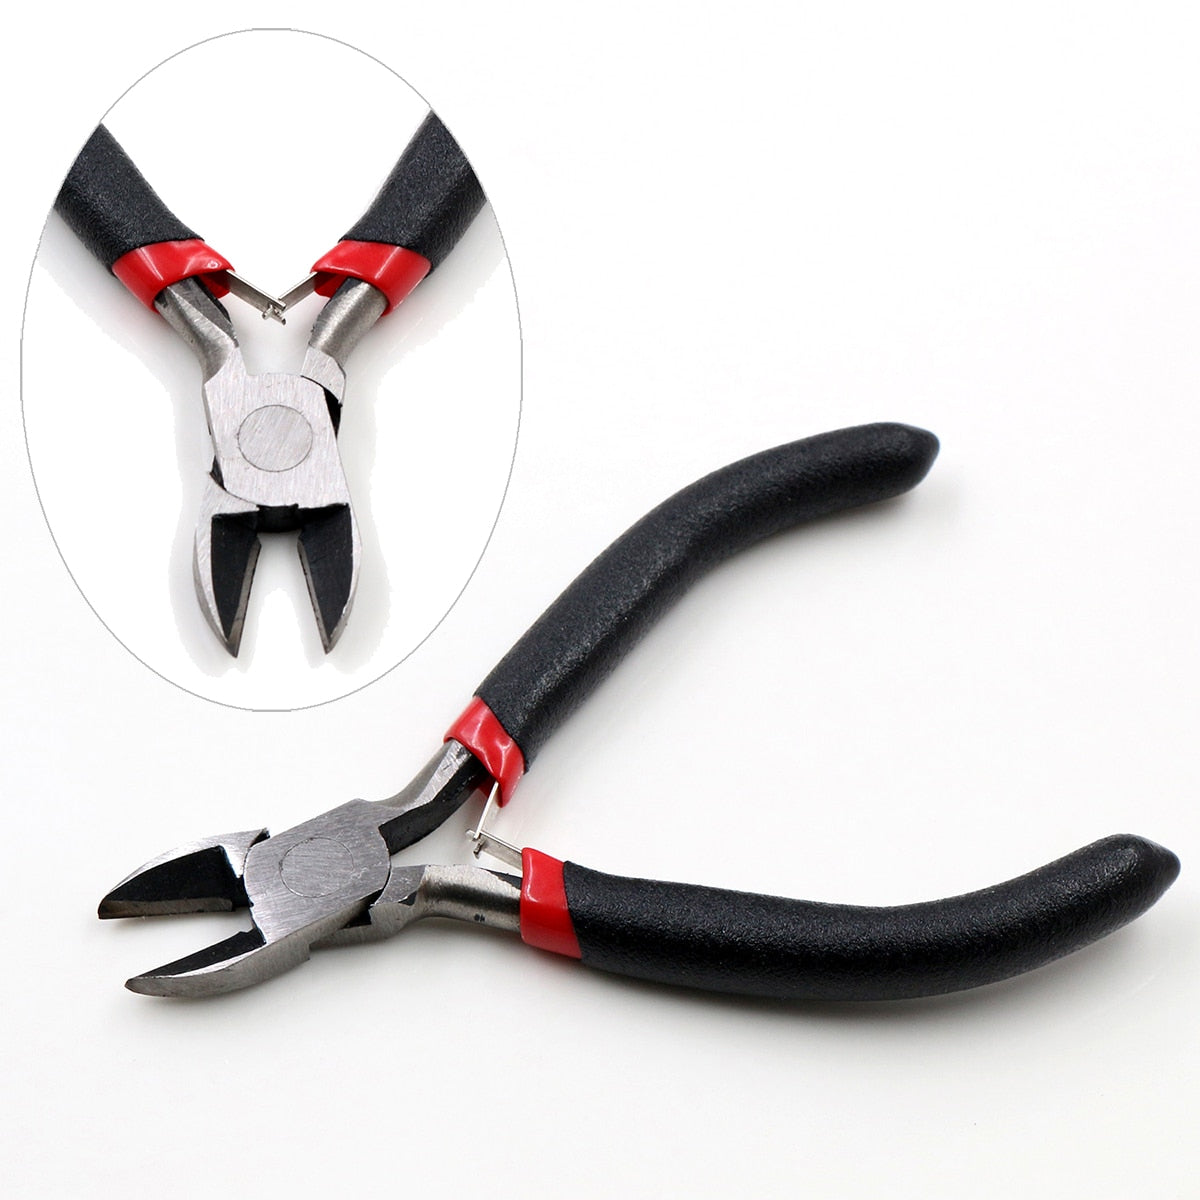 1 Piece Stainless Steel Needle Nose Pliers Jewelry Making Hand Tool Black 12.5cm